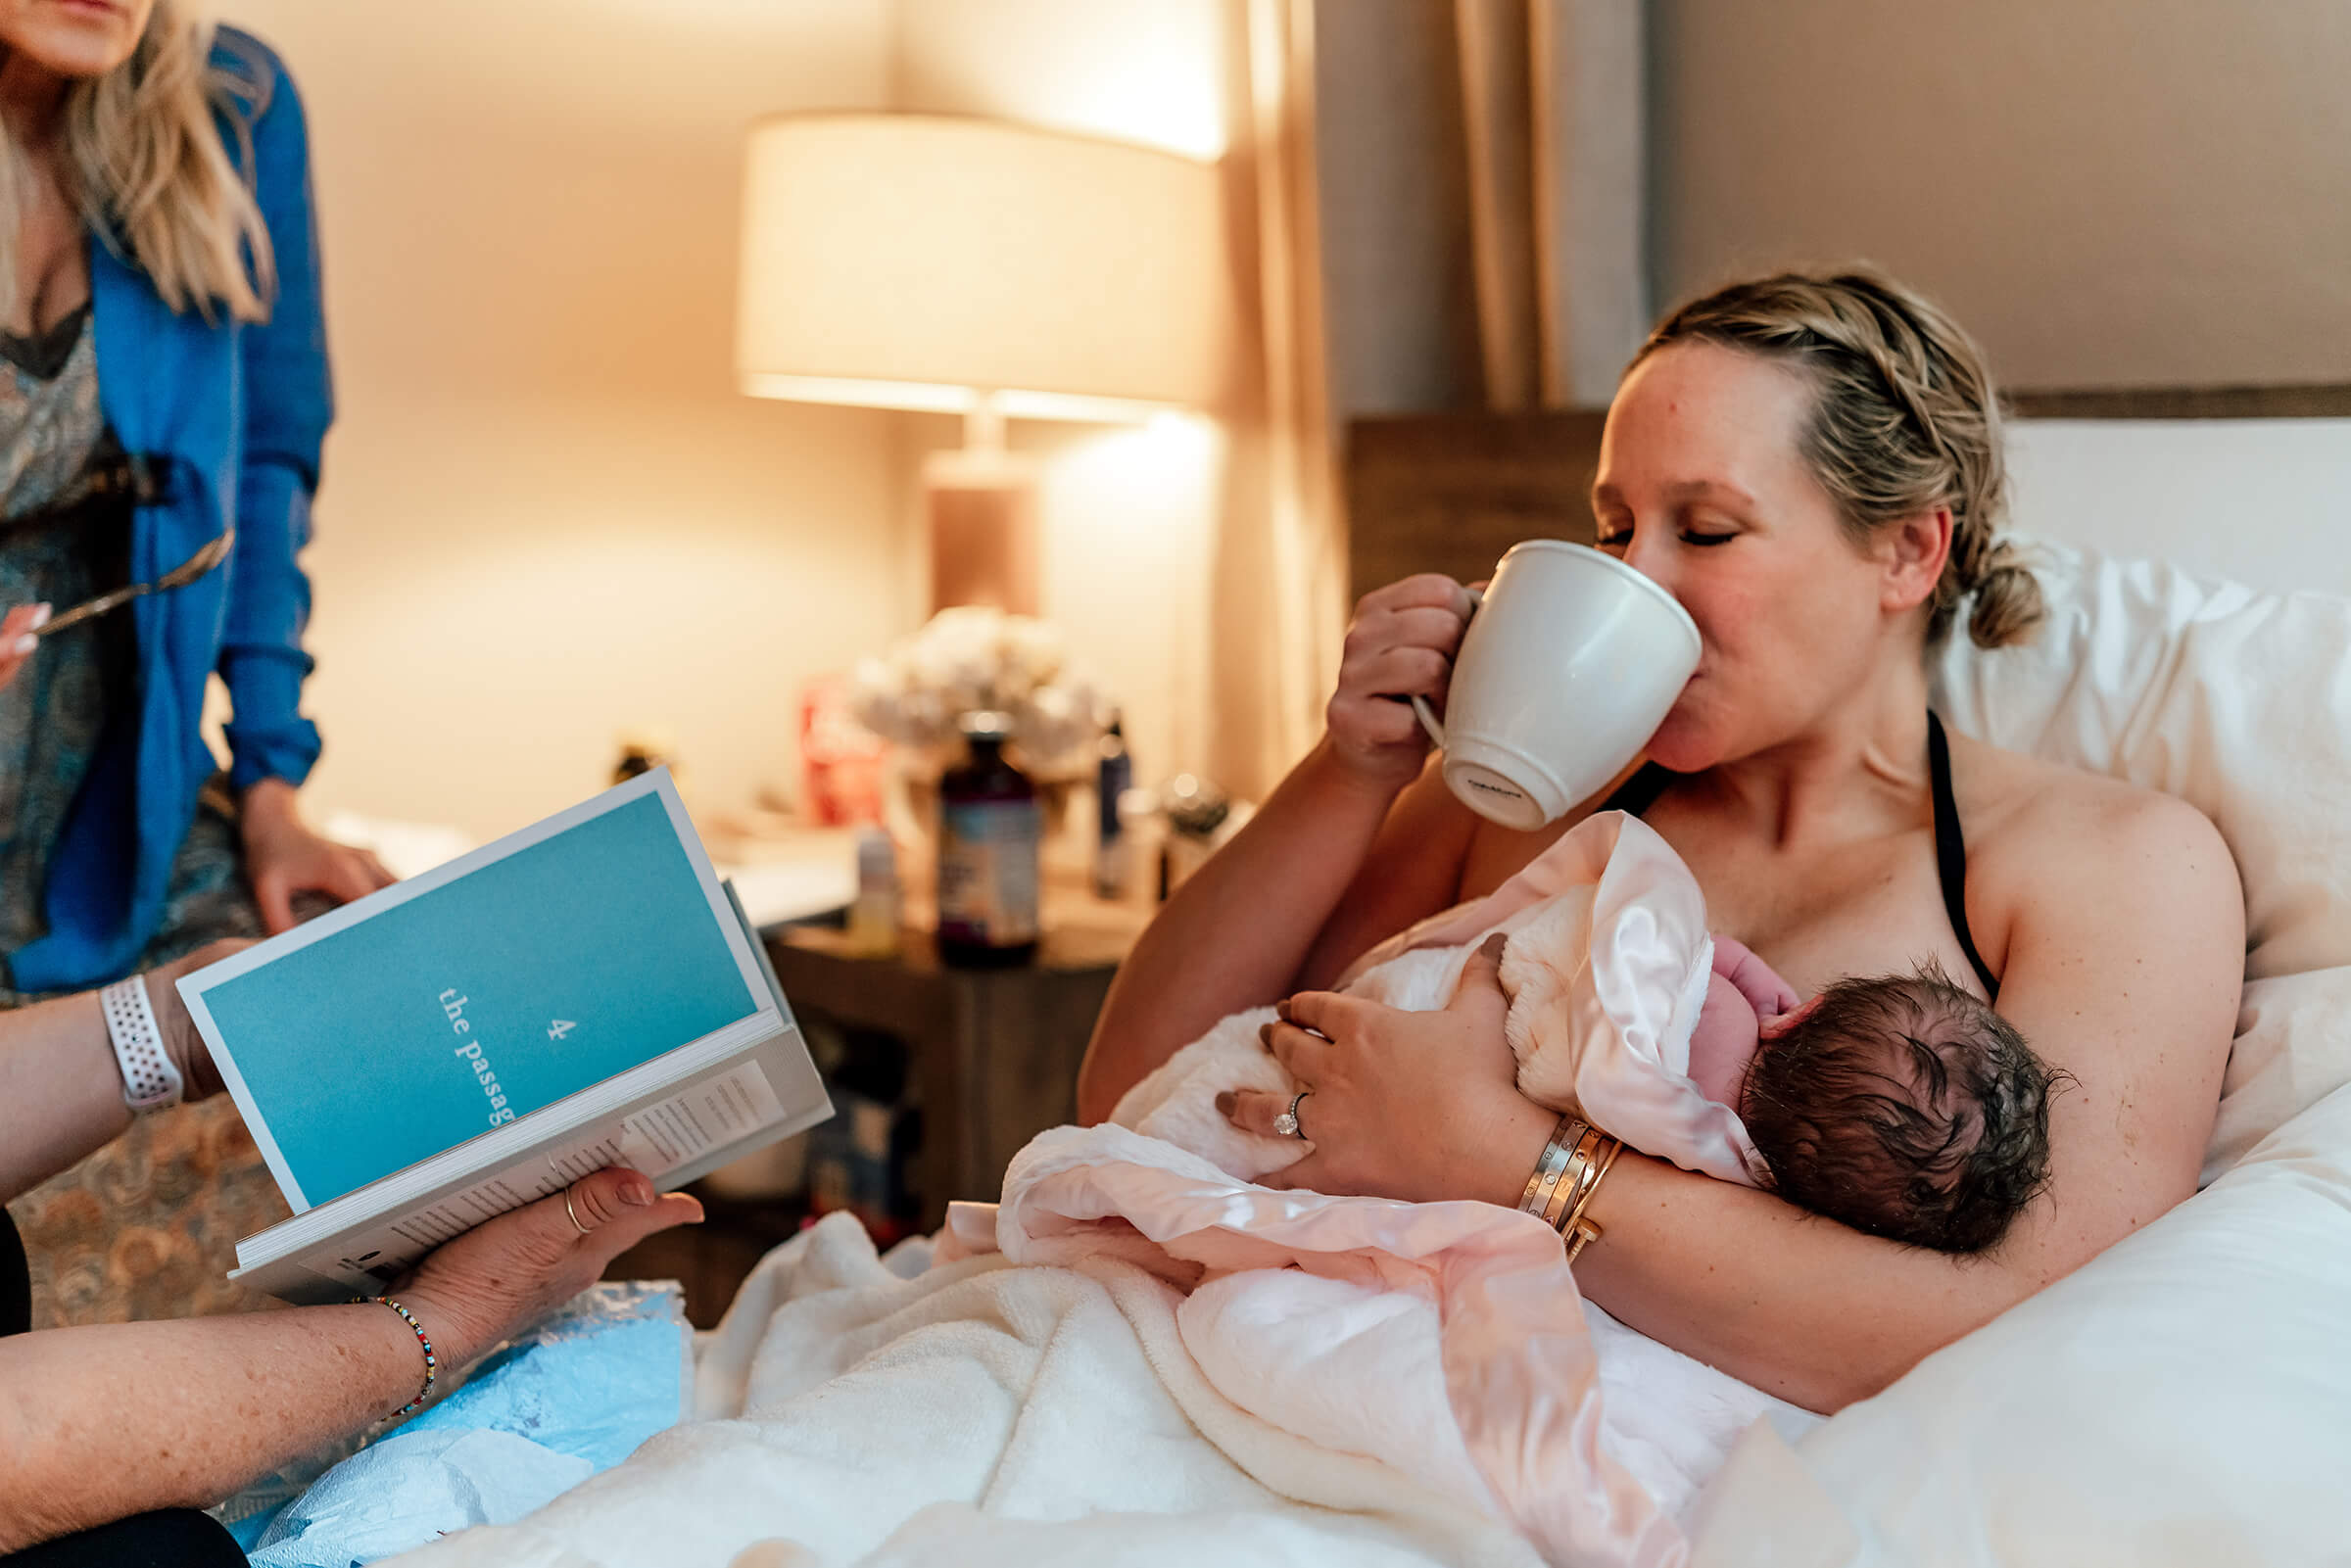 herbal tea after home birth 2019